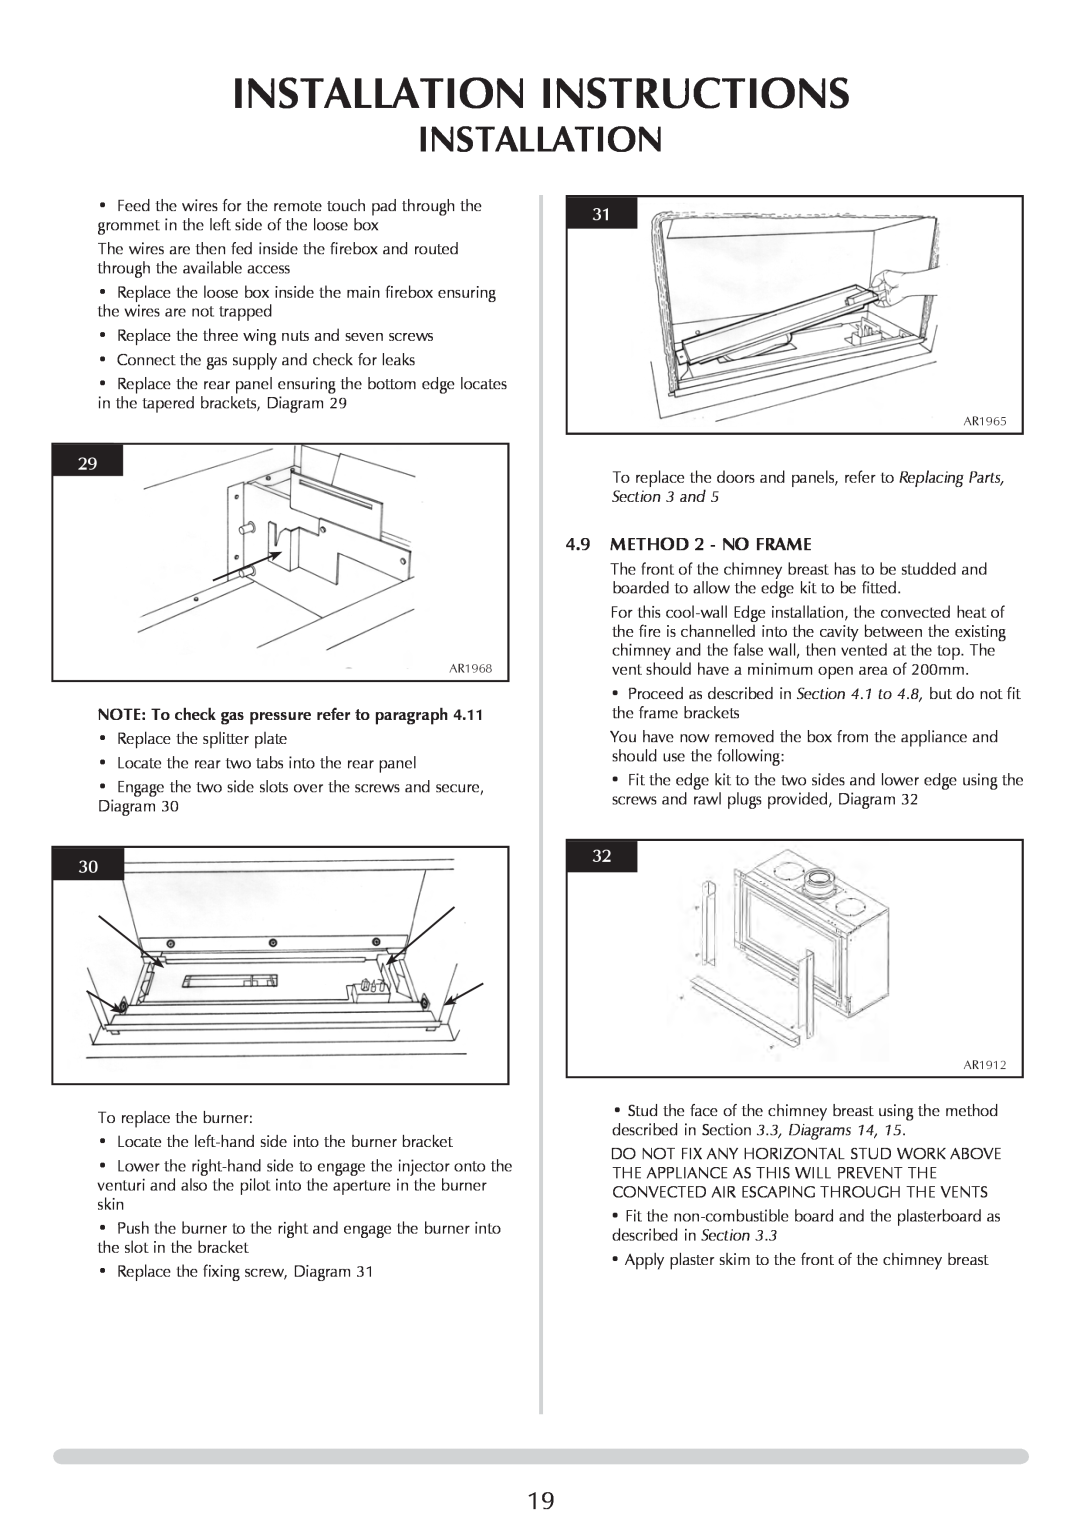 Stovax 8701CFCHEC manual Installation Instructions, 4.9METHOD 2 - NO FRAME, NOTE To check gas pressure refer to paragraph 